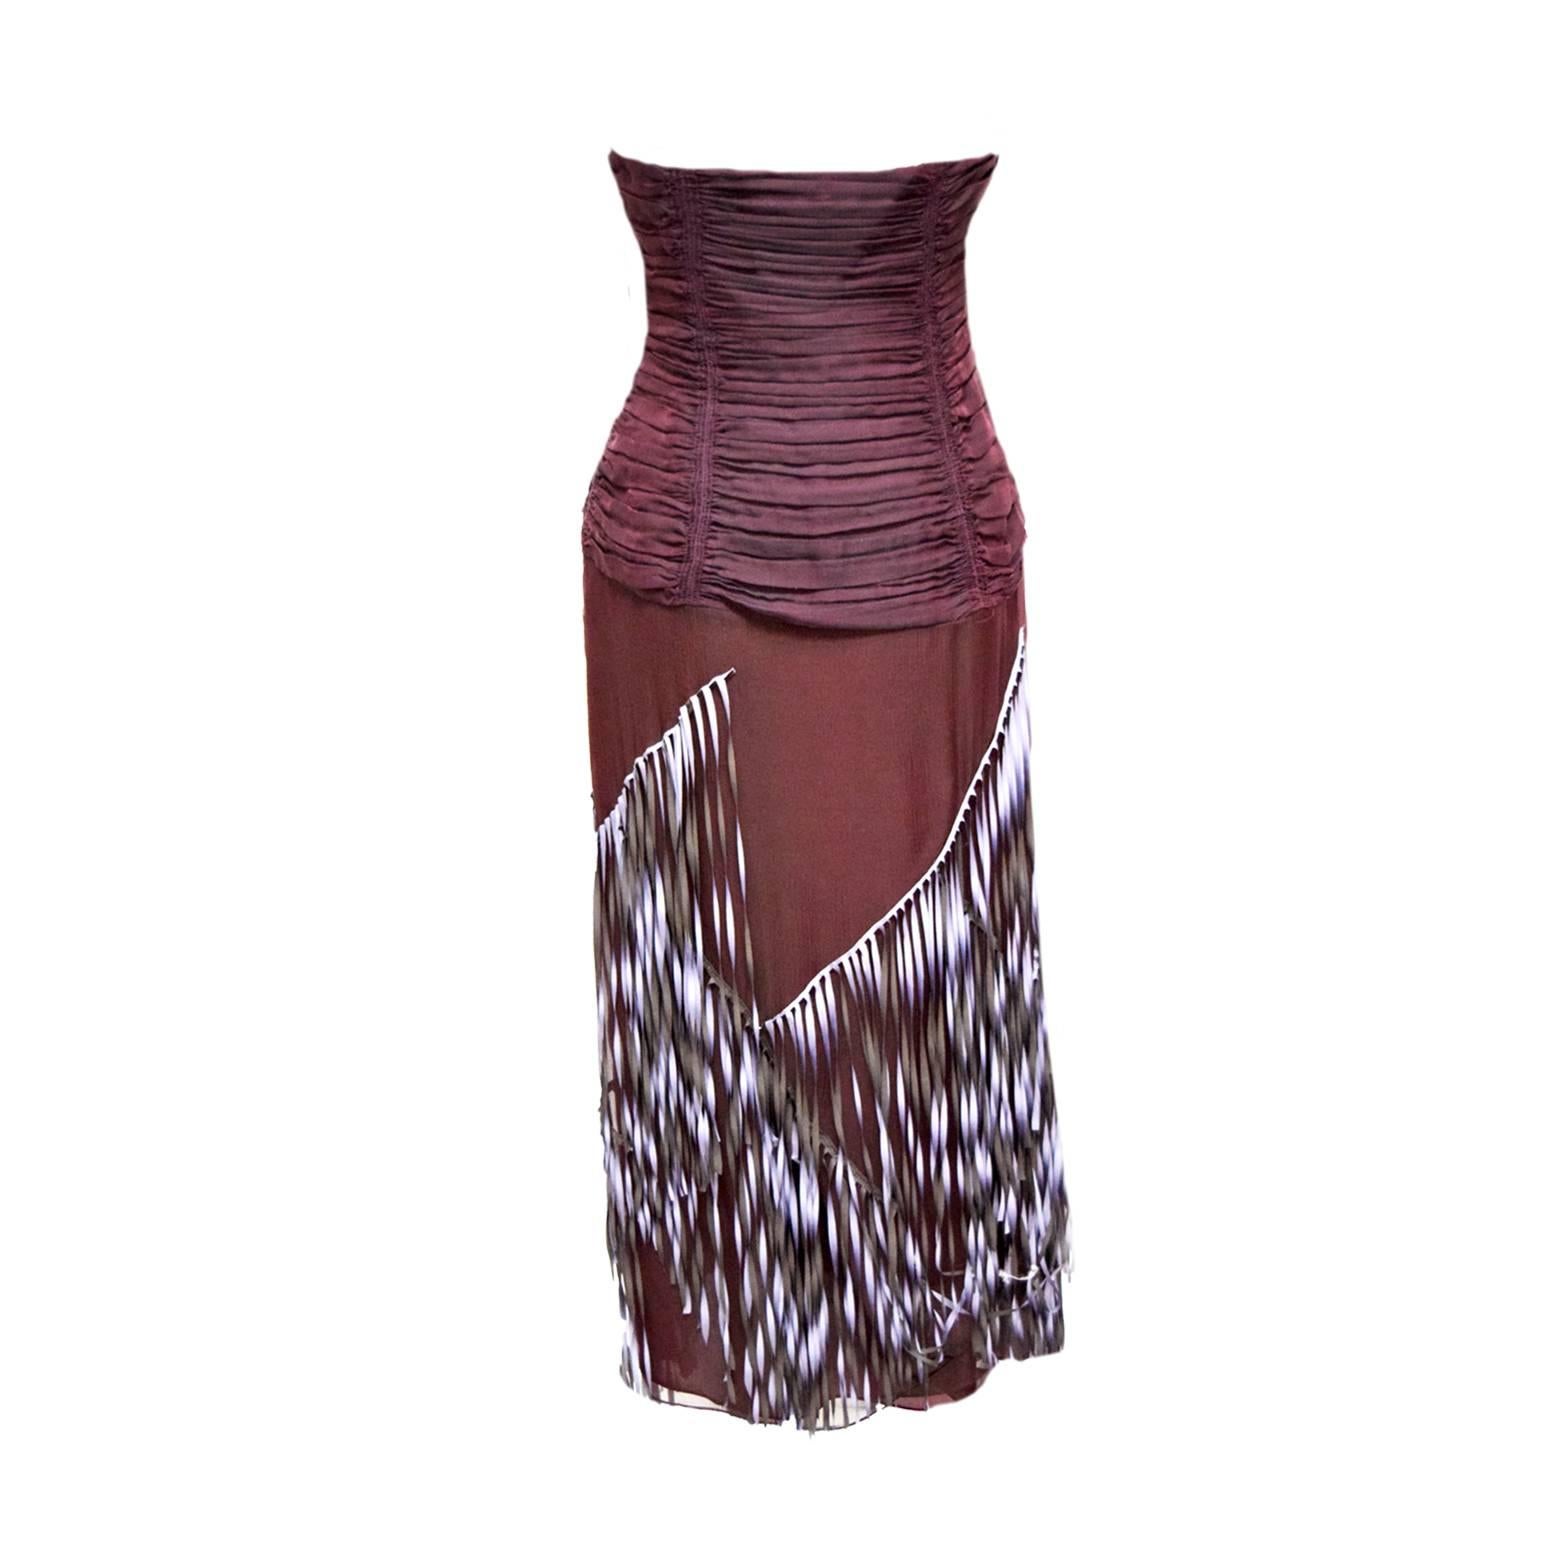 This unique and beautiful Lela Rose dress has periwinkle and olive fringe detailing along the skirting. The bodice is ruche merlot 100% Silk and gives the illusion of wearing an extravagant two piece. 